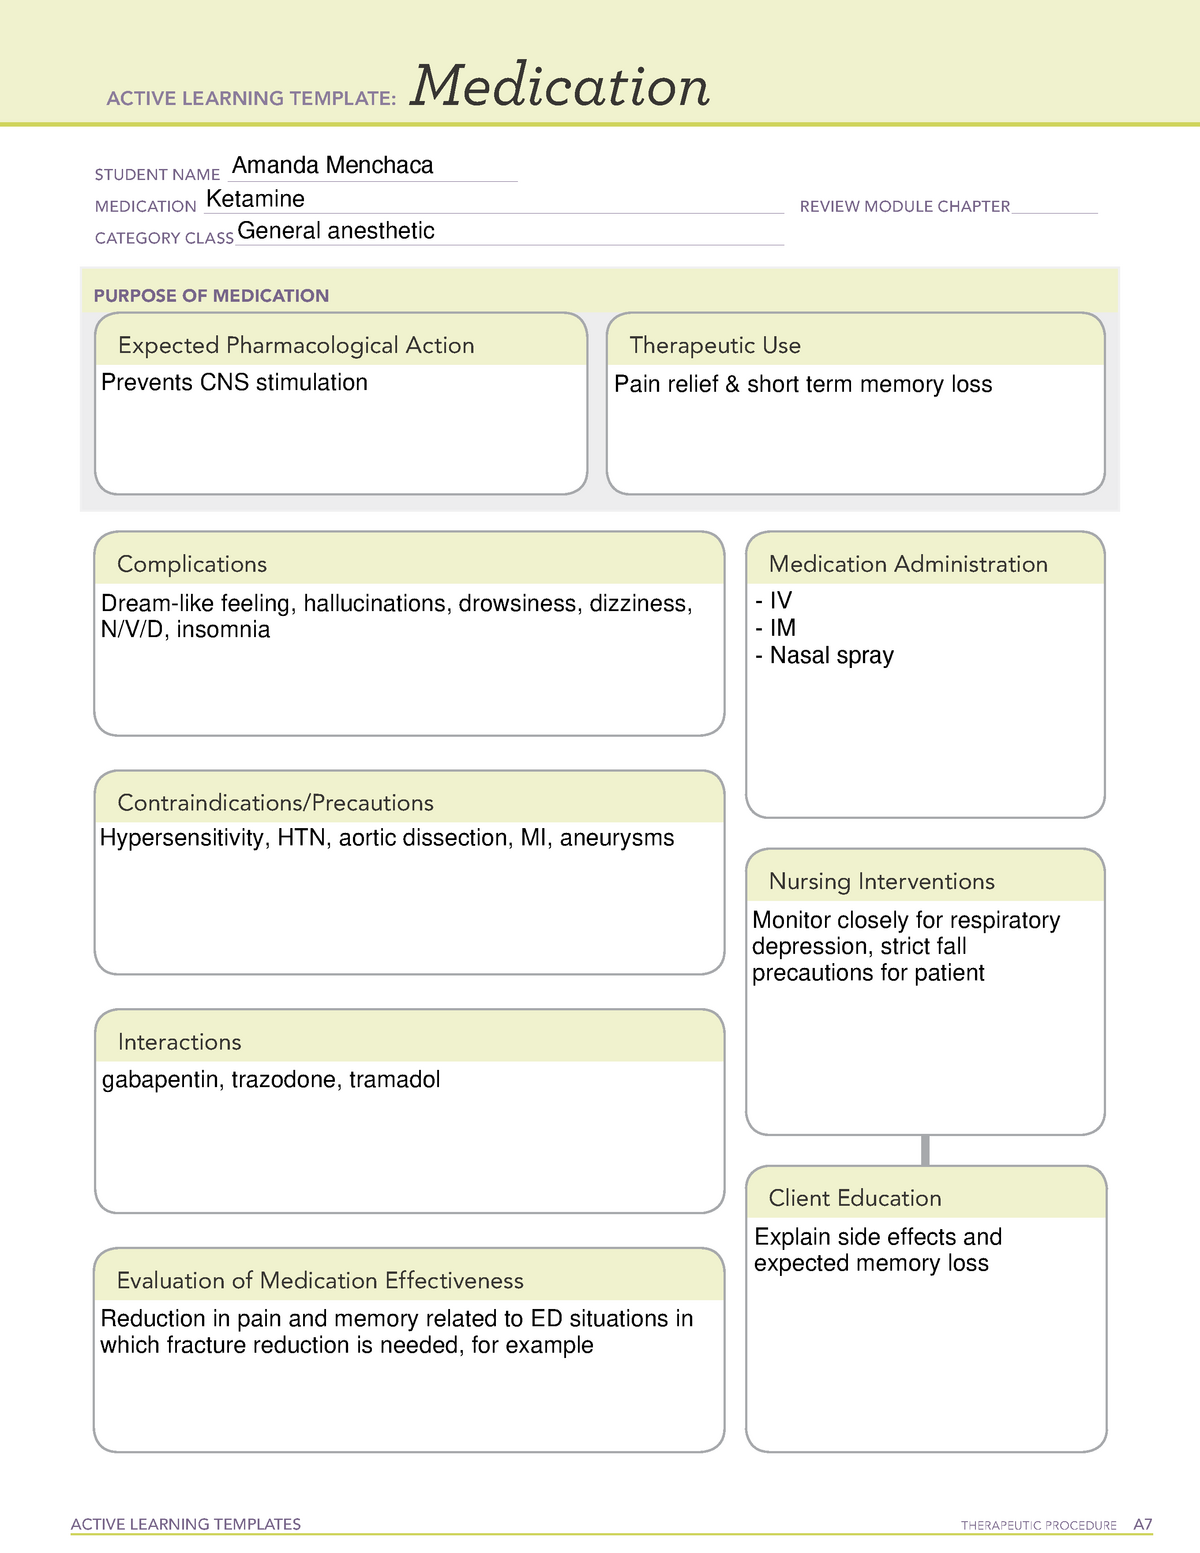 Ketamine MED ACTIVE LEARNING TEMPLATES THERAPEUTIC PROCEDURE A